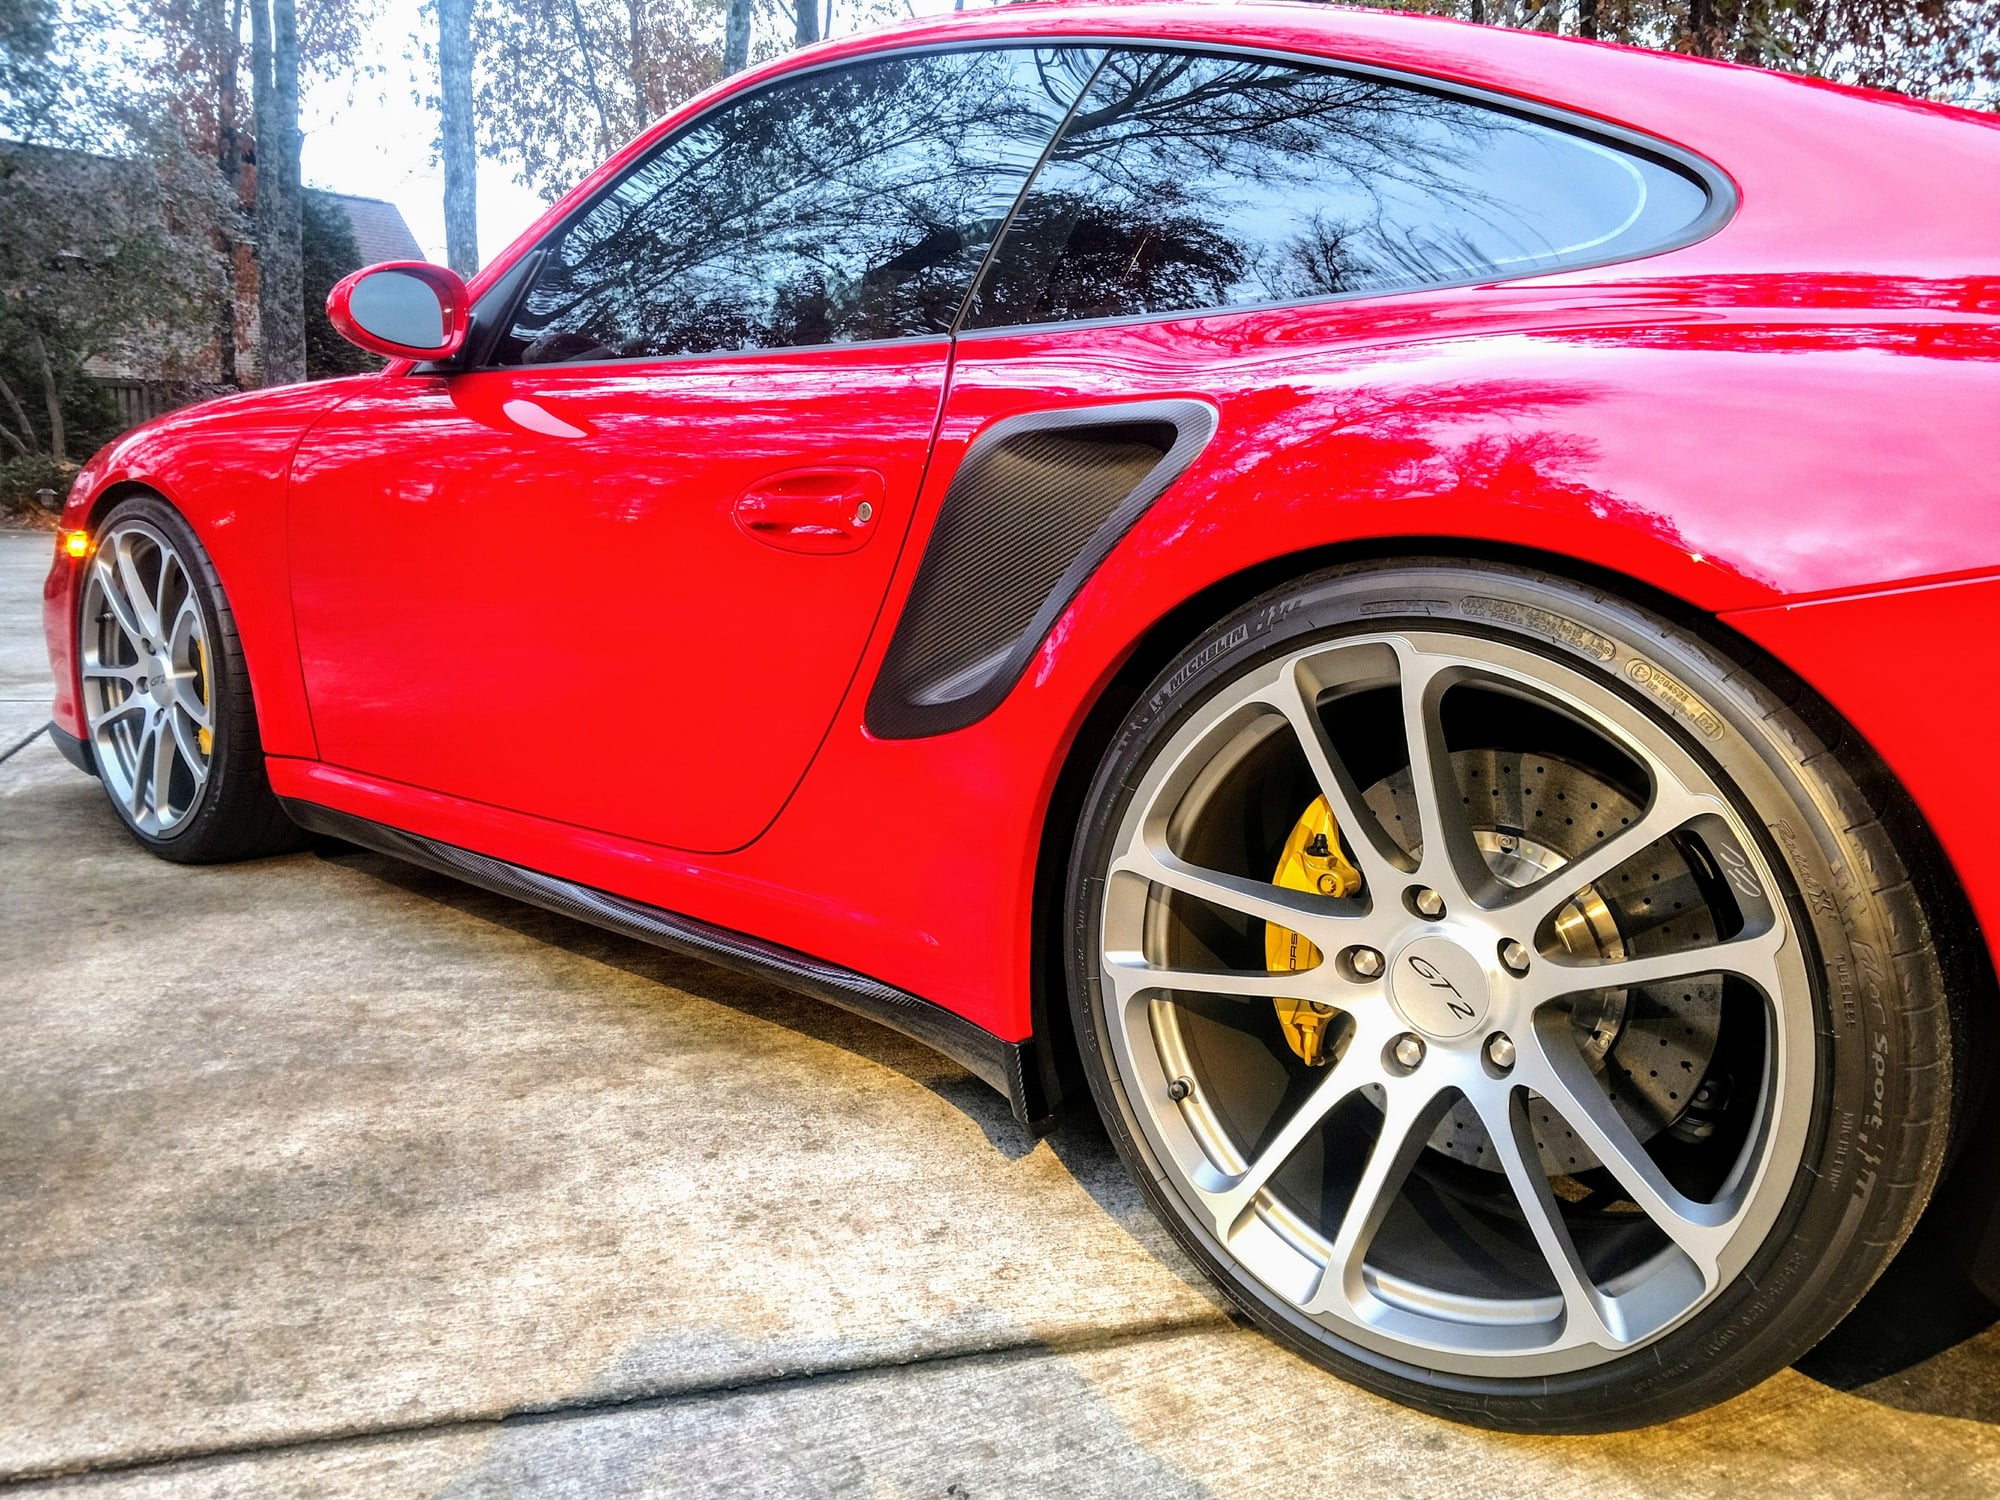 2008 Porsche GT2 - 2008 Porsche 911 GT2 - Used - VIN WP0AD29938S796250 - 16,216 Miles - 6 cyl - 2WD - Manual - Coupe - Red - New Market, AL 35761, United States